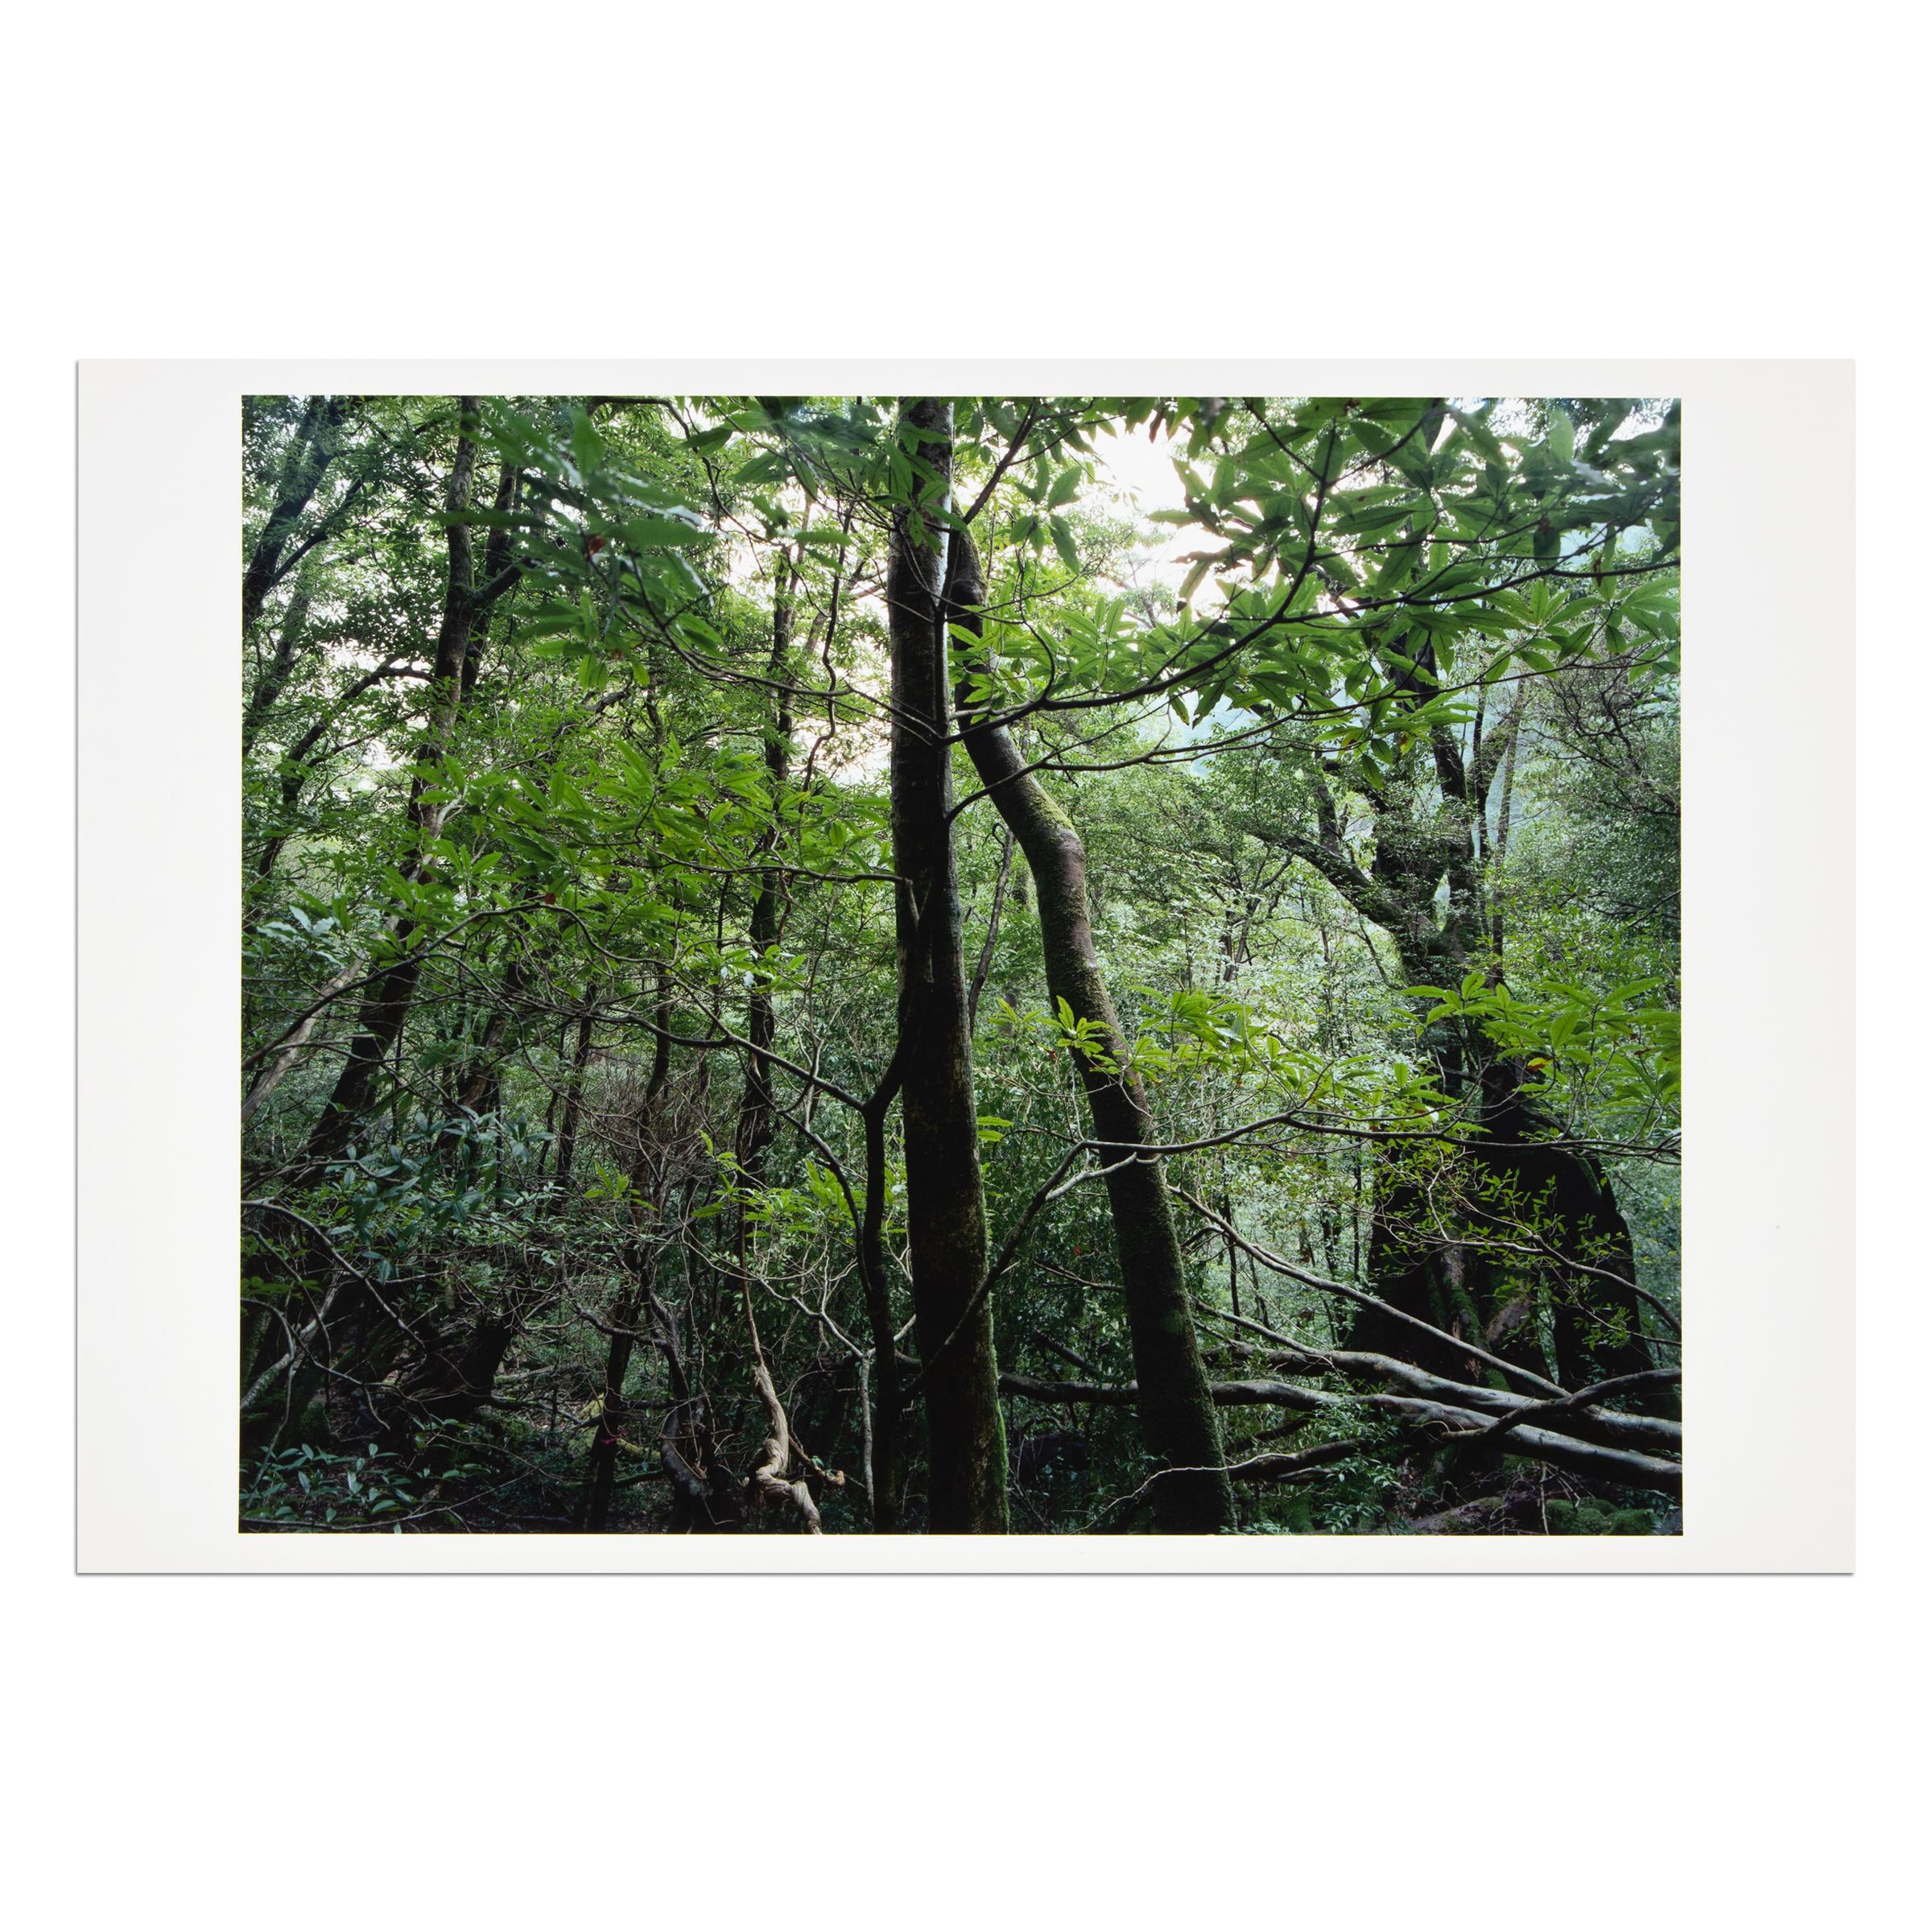 Thomas Struth (German, b. 1954)
Yakushima (from Paradies), 2004
Medium: Pigmented inkjet print
Dimensions: 32.9 x 48.3 cm (13 x 19 in)
Edition size: undisclosed
Markings: Hand-signed and stamped, verso